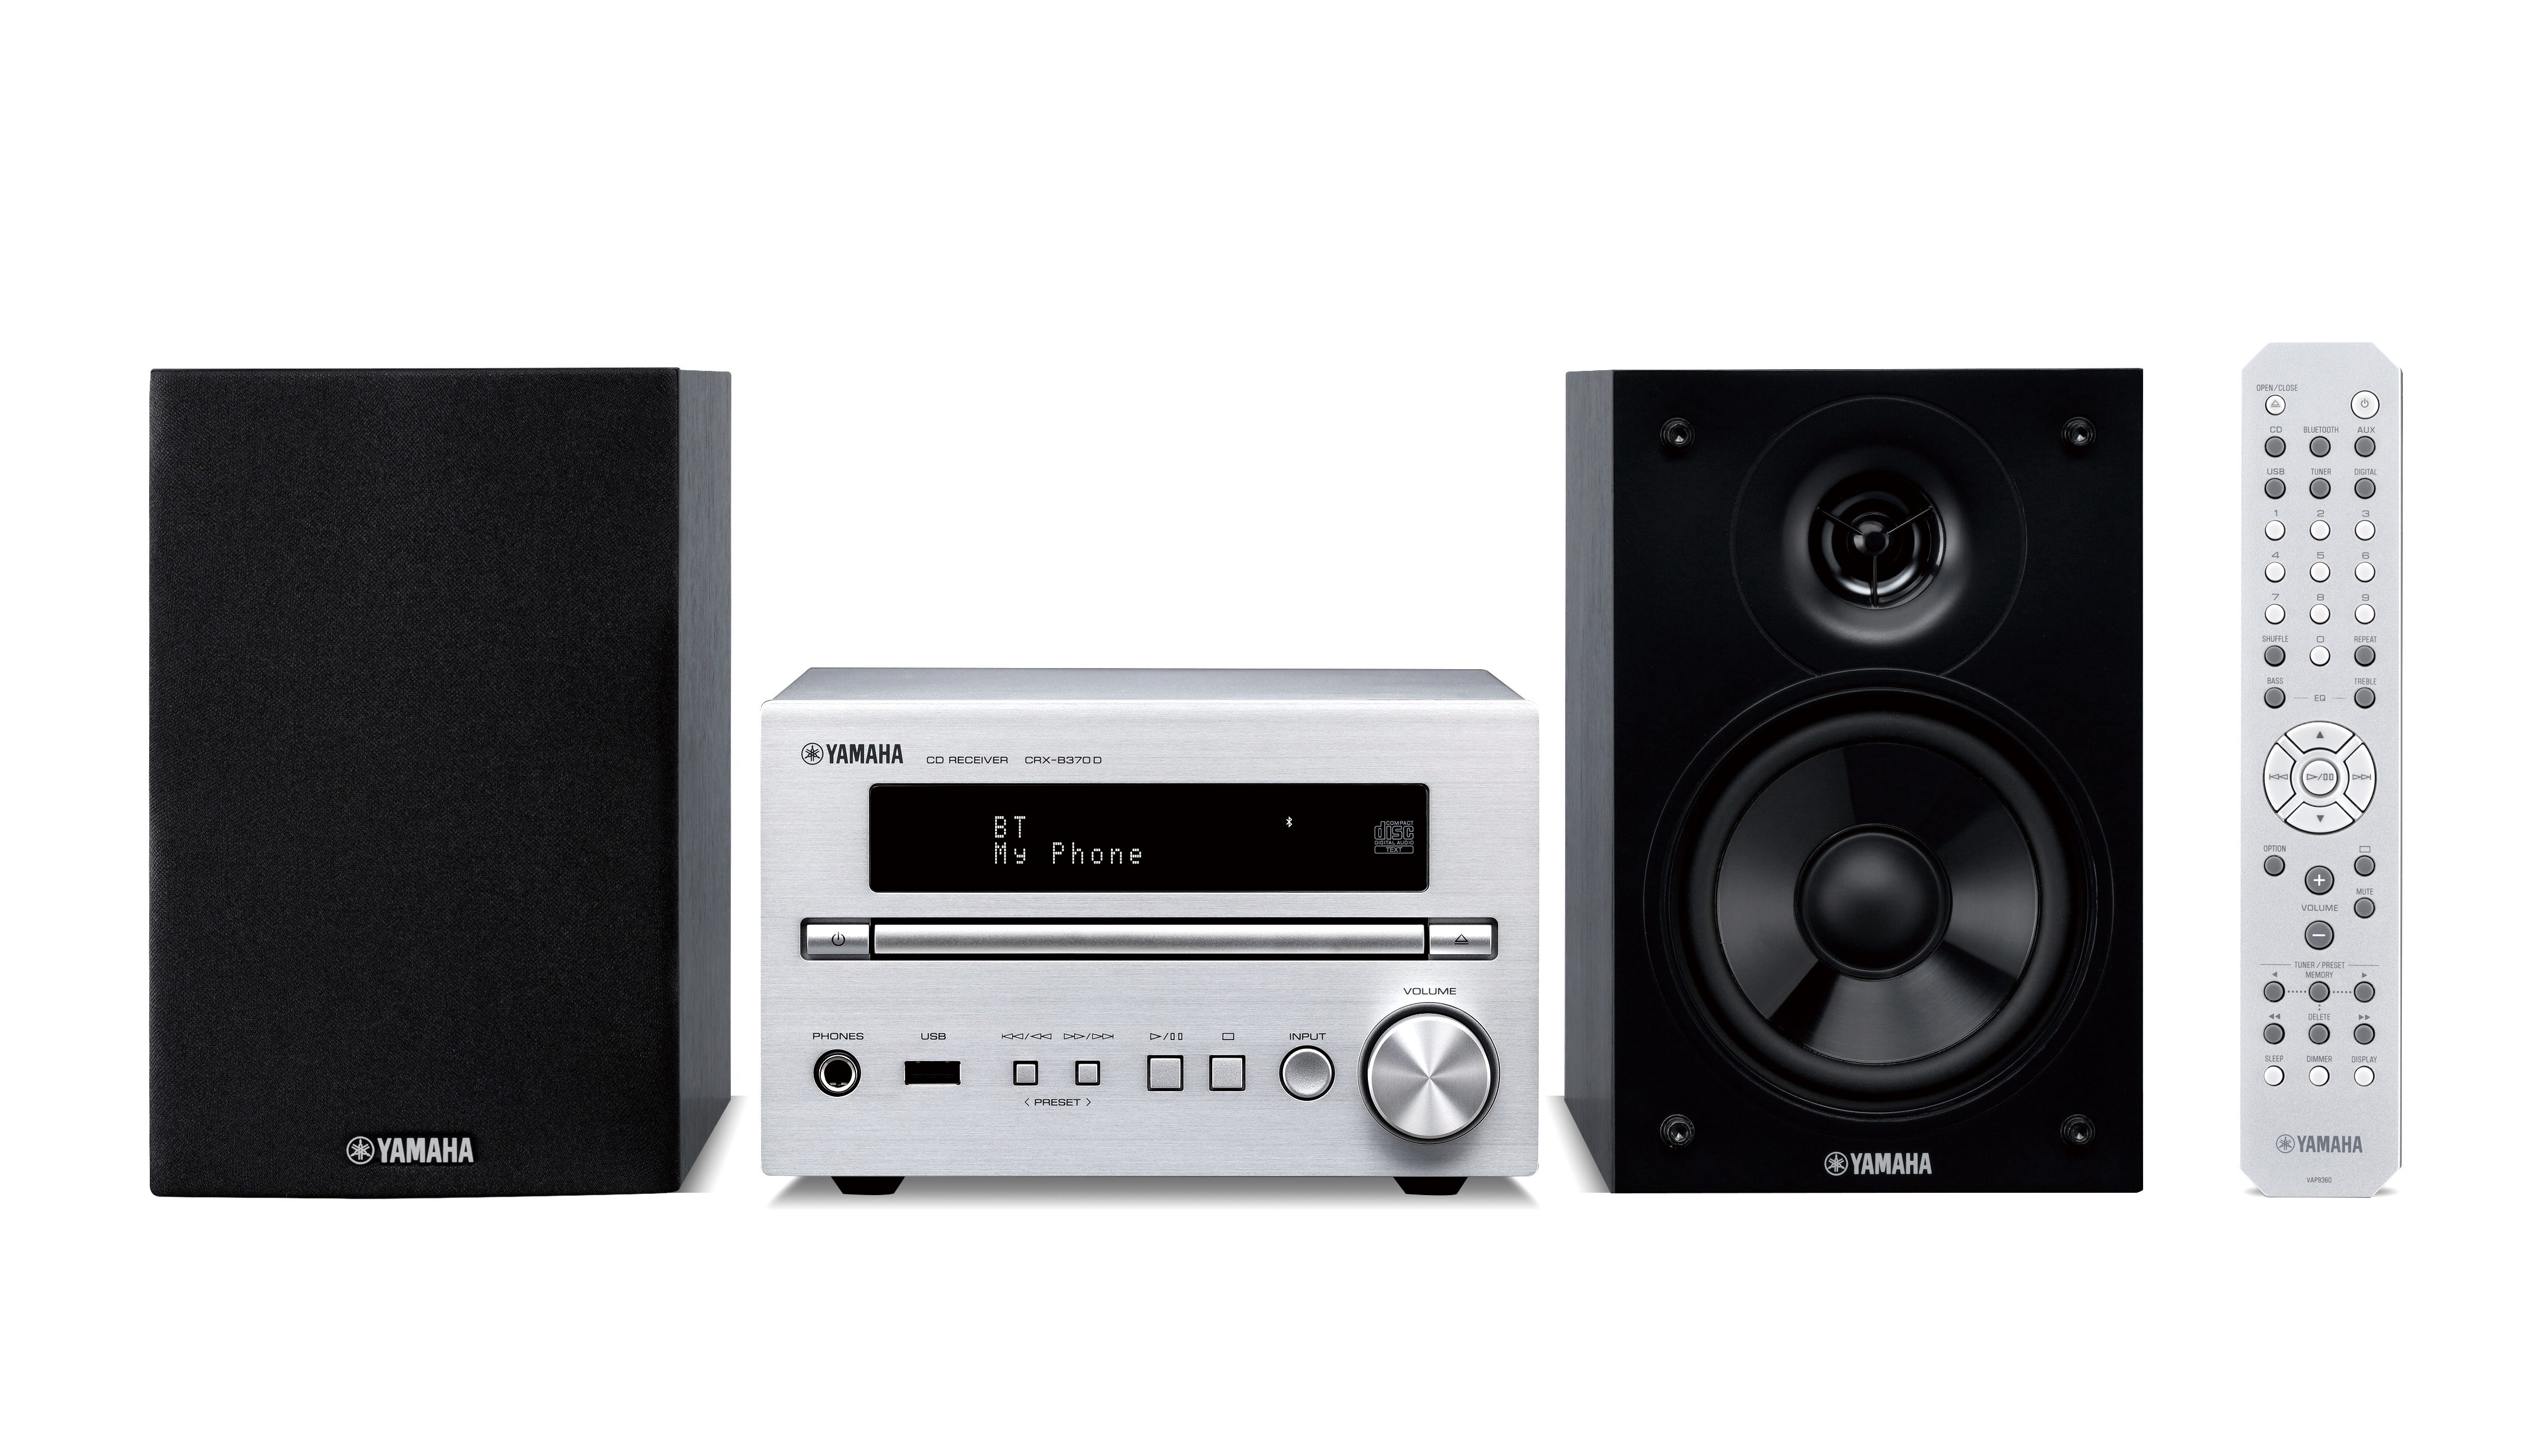 European - & Visual Other - - - Countries MCR-B270D Products HiFi - Yamaha Systems Overview - Audio